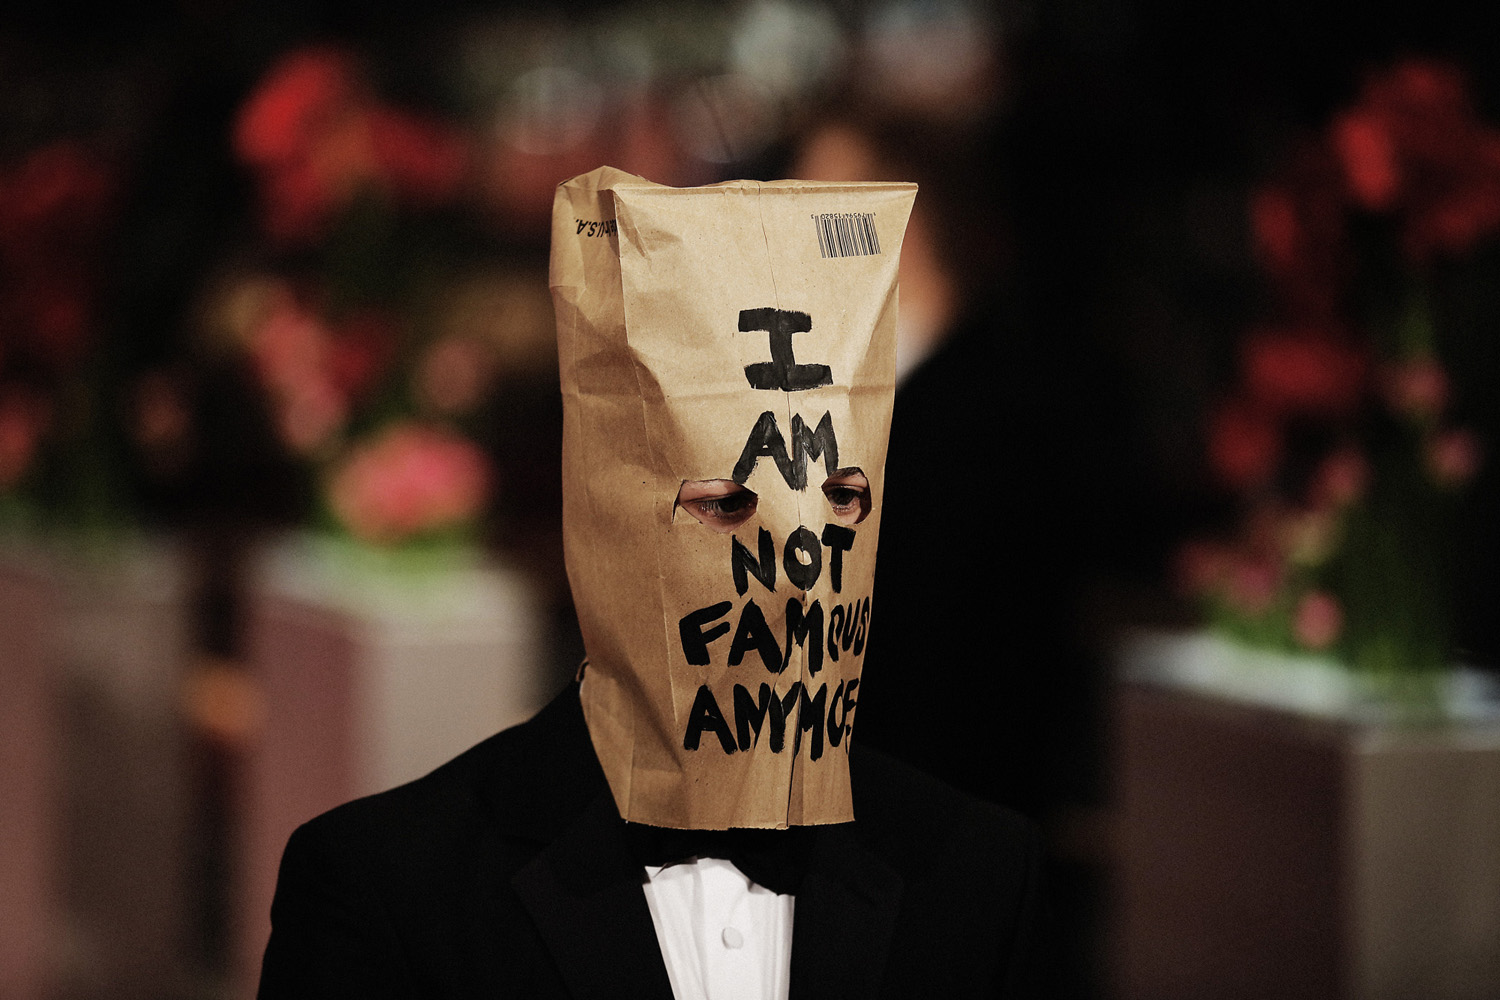  Shia LaBeouf attends the 'Nymphomaniac Volume I (long version)' premiere during 64th Berlinale International Film Festival at Berlinale Palast on February 9, 2014 in Berlin, Germany.